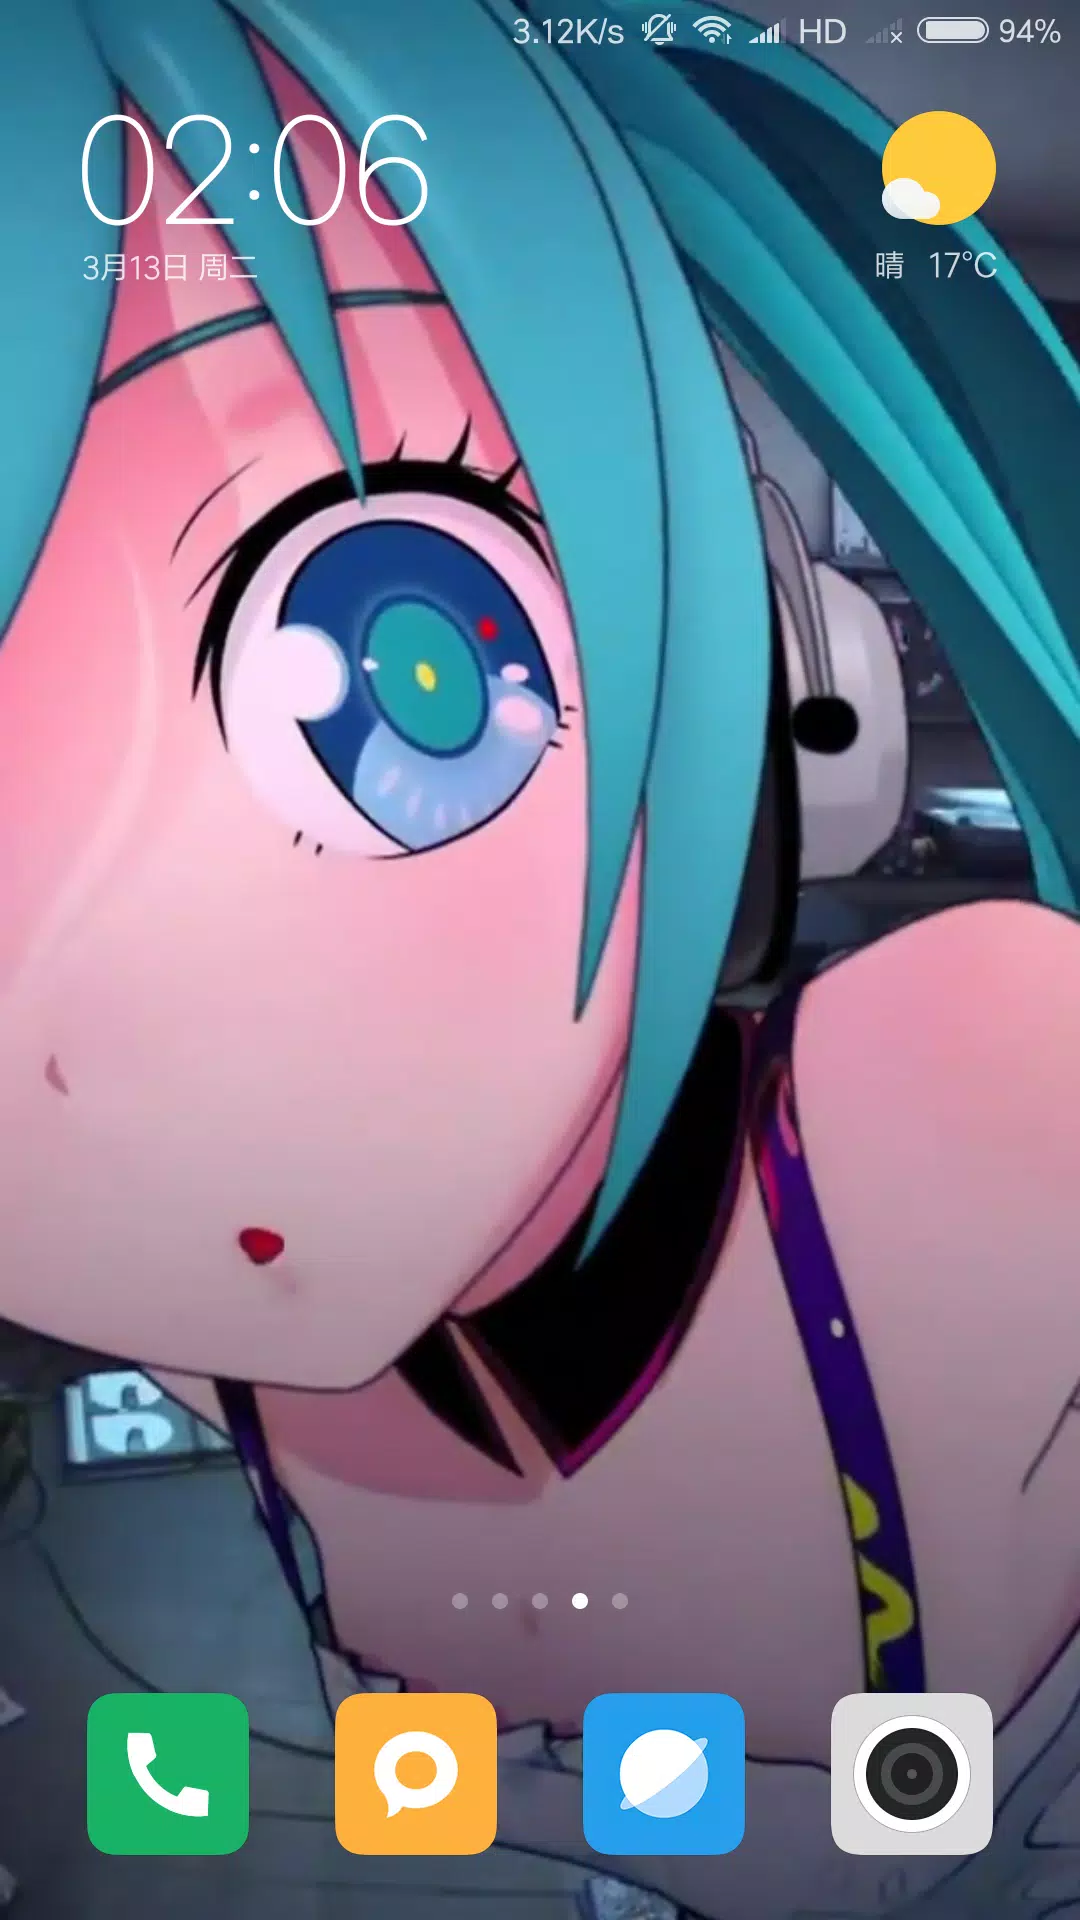 Hatsune Miku Video Live Wallpaper Redial 初音ミク Apk Pour Android Telecharger